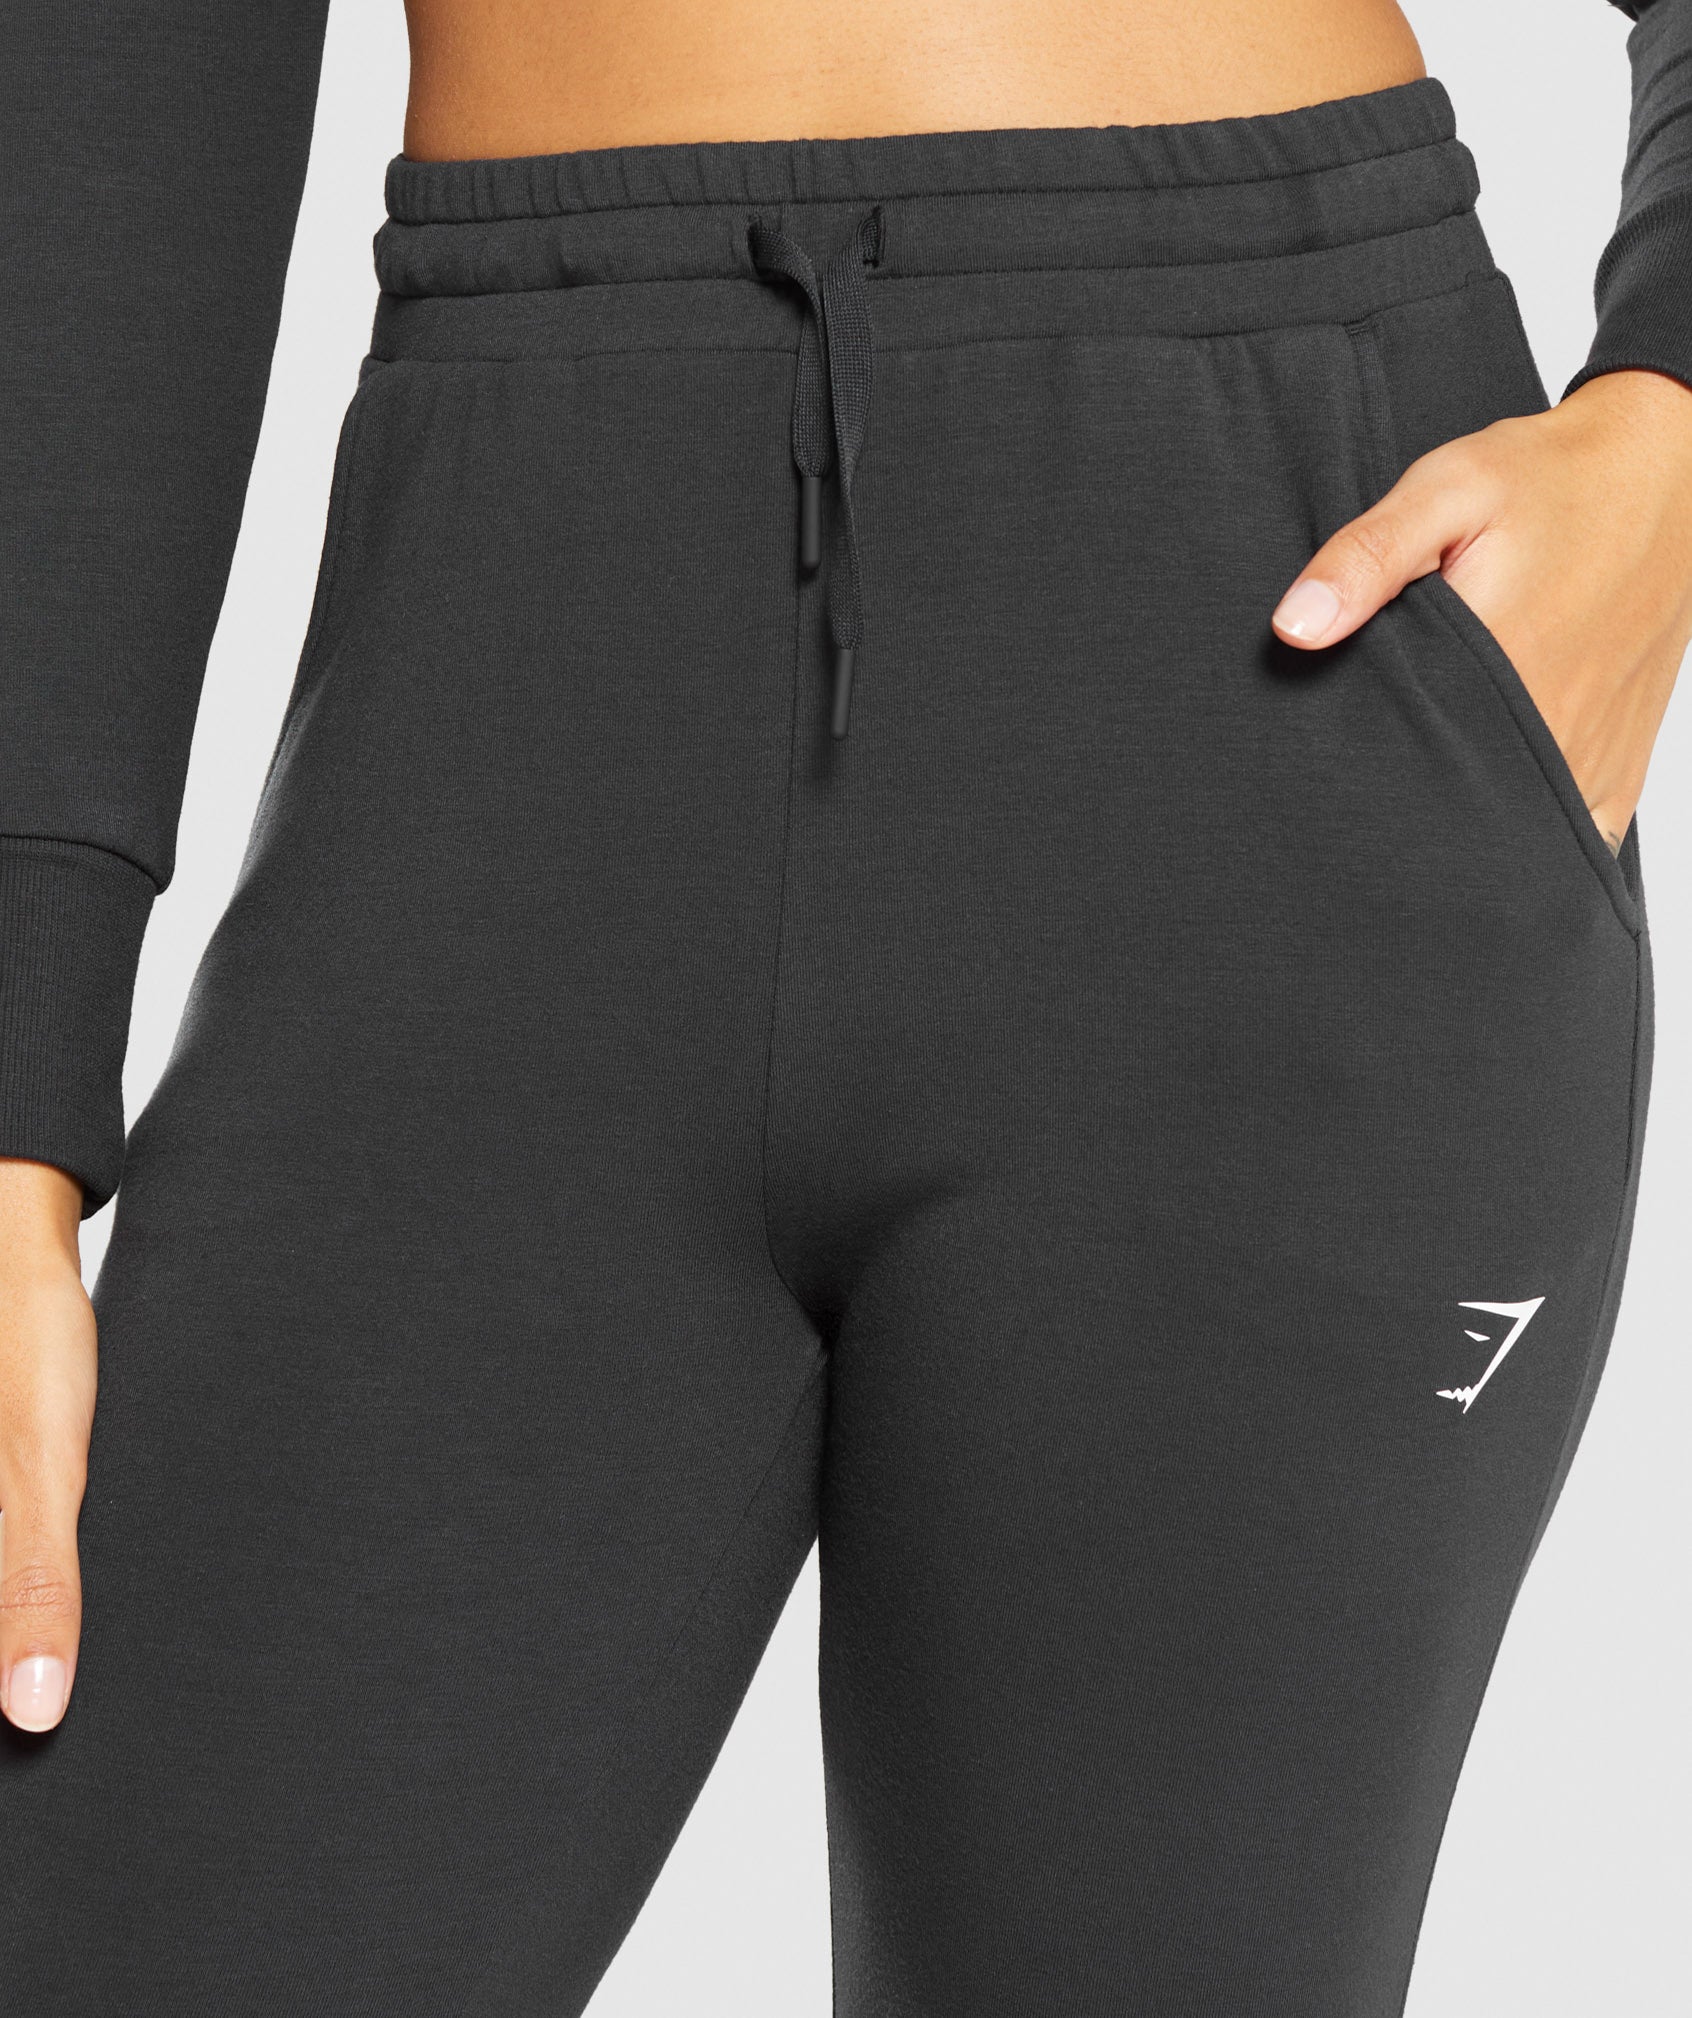 Pippa Training Joggers in Black